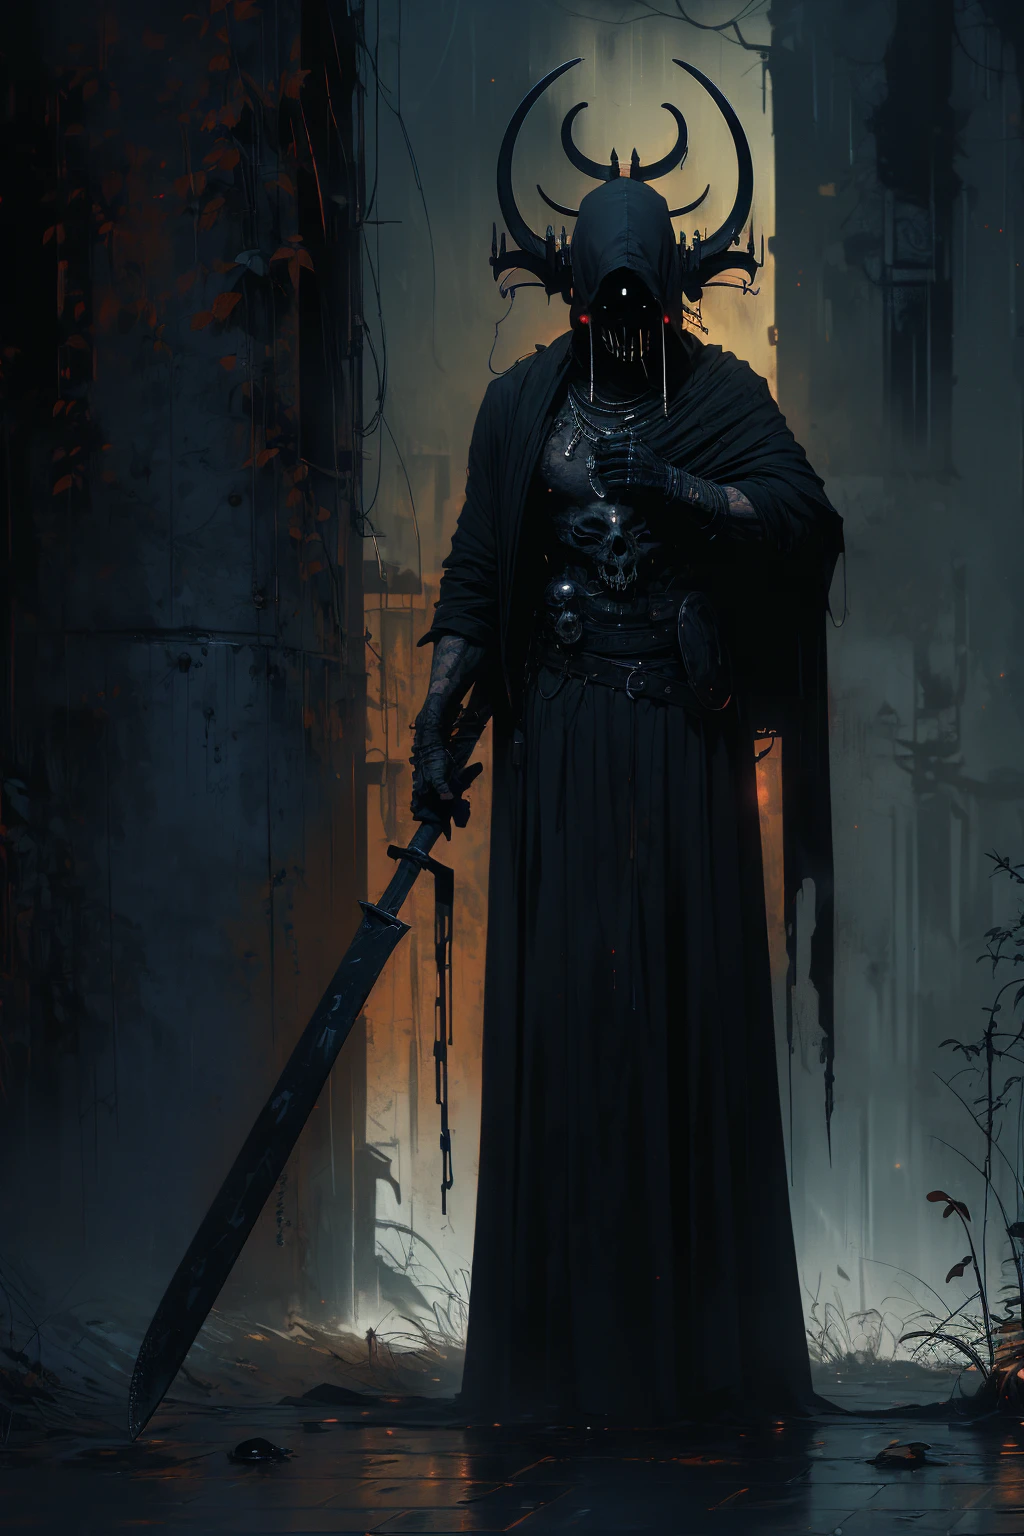 (best quality,ultra-detailed),(dark,spooky) portrait of (the Black Reaper, the grim reaper) in a (sinister, eerie) setting, with (ominous, dim) lighting. The Black Reaper is depicted with (piercing, glowing) eyes and (sharp, menacing) scythe. The atmosphere is filled with (mysterious, haunting) elements and (subtle, eerie) details. The artwork is inspired by (gothic, macabre) themes and exhibits (dramatic, contrasting) colors and (deep, shadowy) tones.